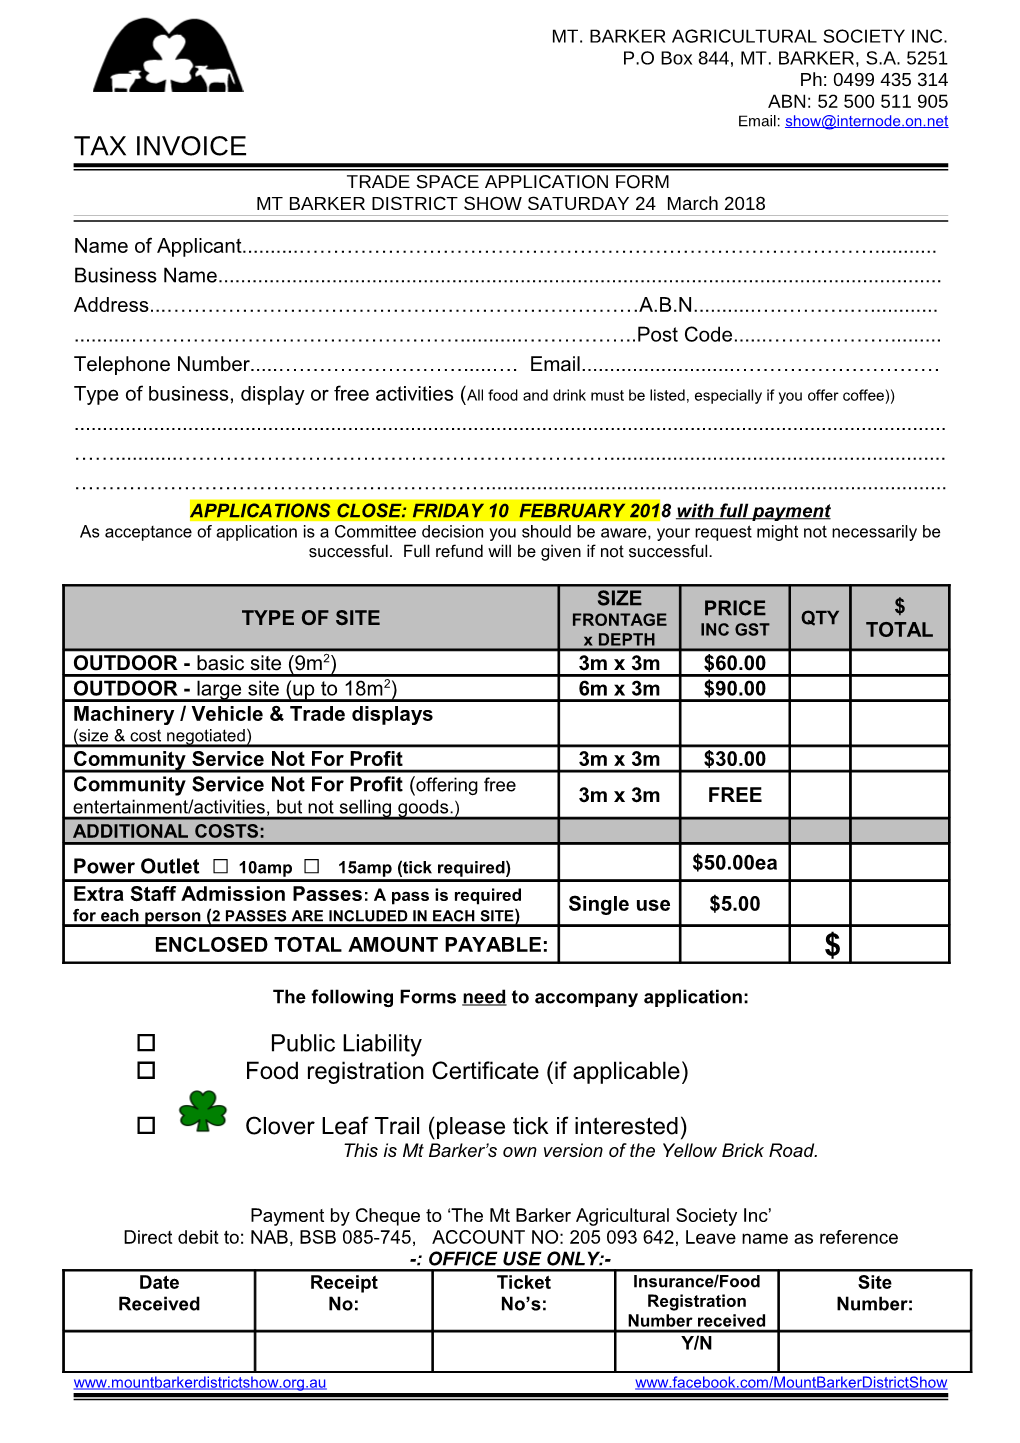 Trade Space Application Form